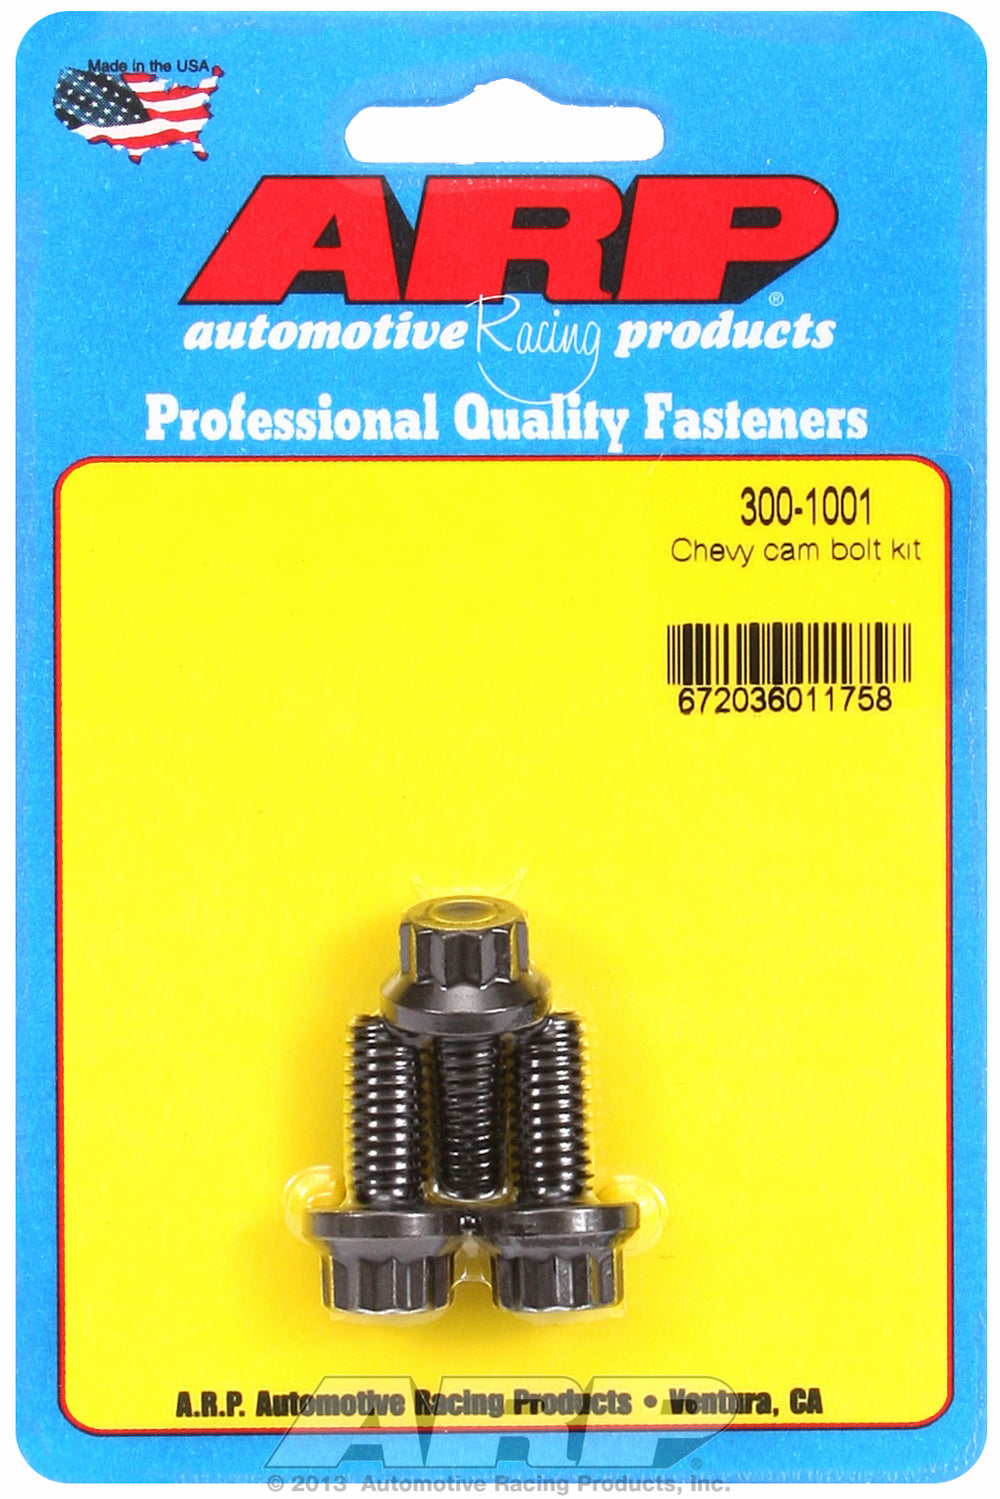 Cam Bolt Kit for Chevrolet 265-454 cid - with oversize head for use with cam button